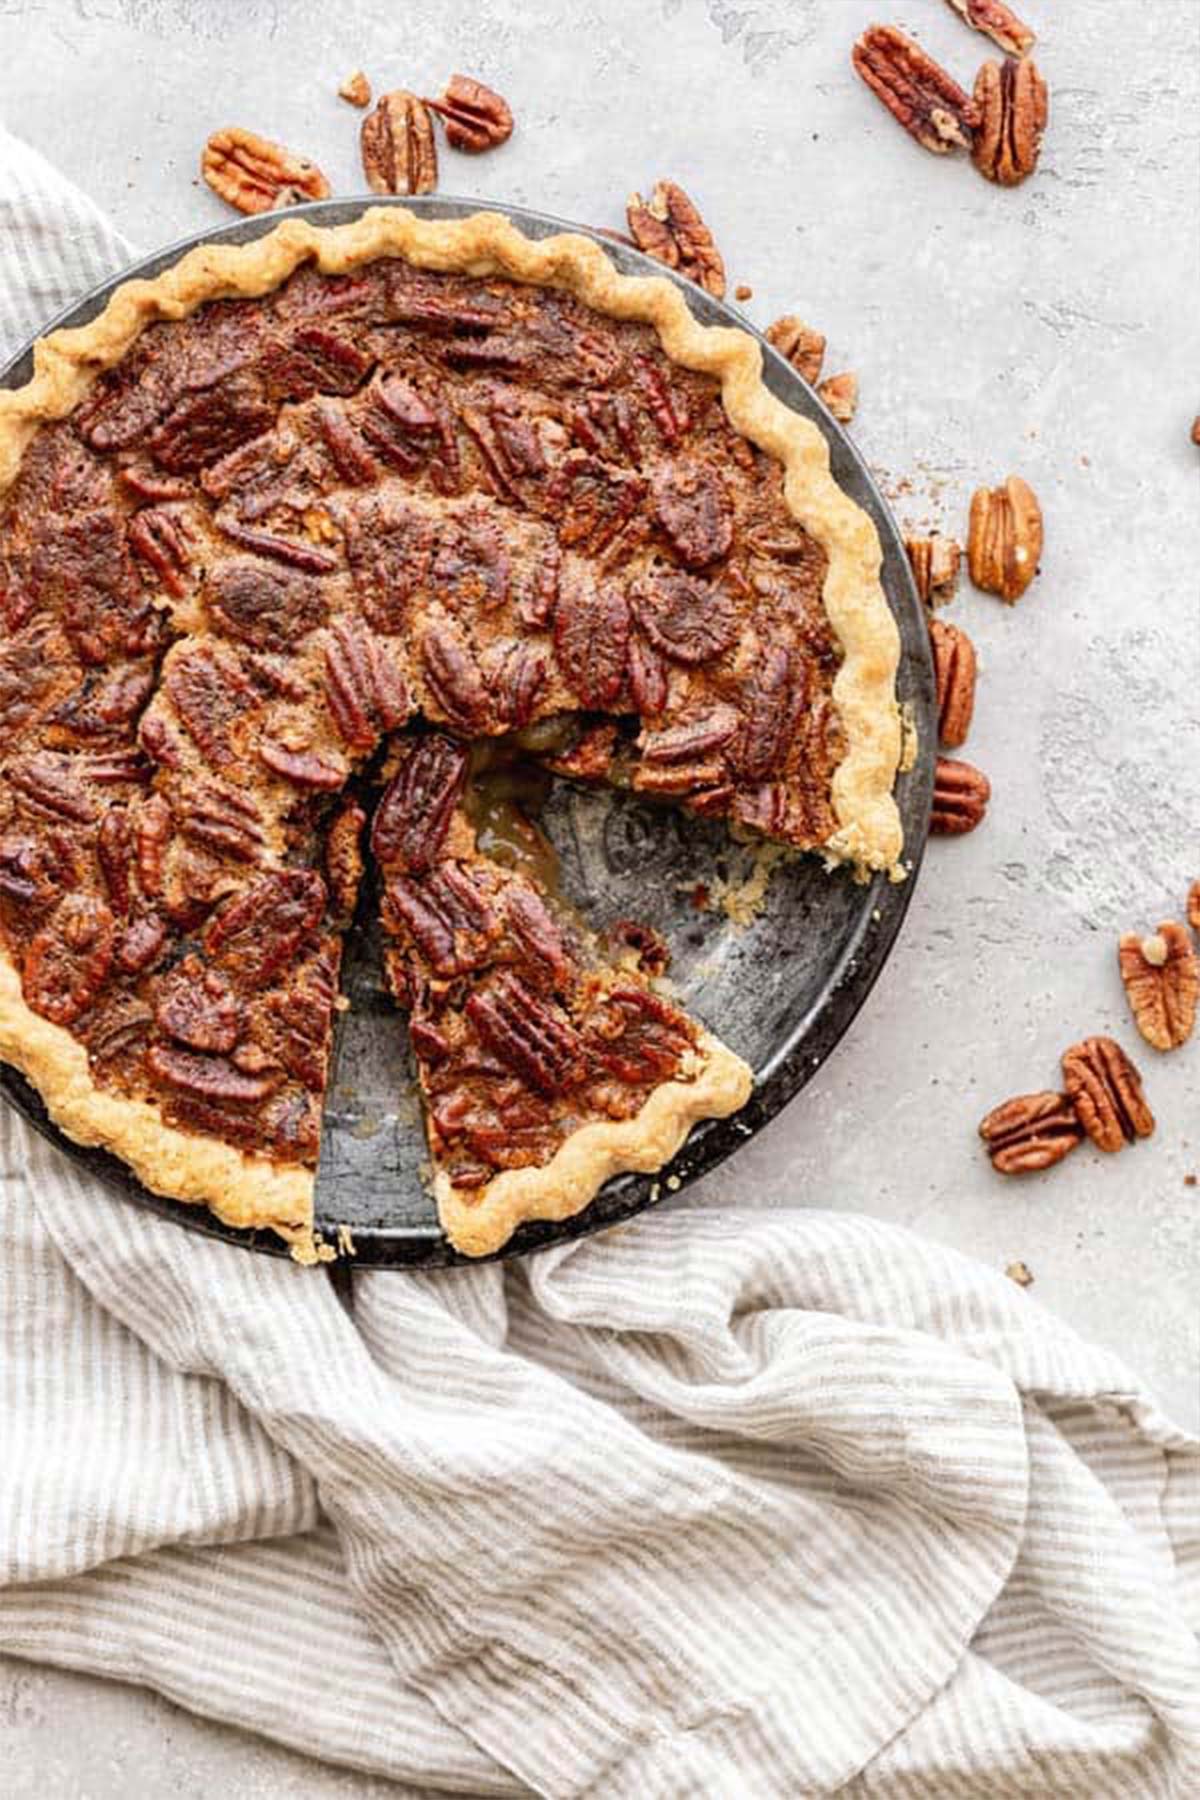 A freshly baked pecan pie with slices ready to serve